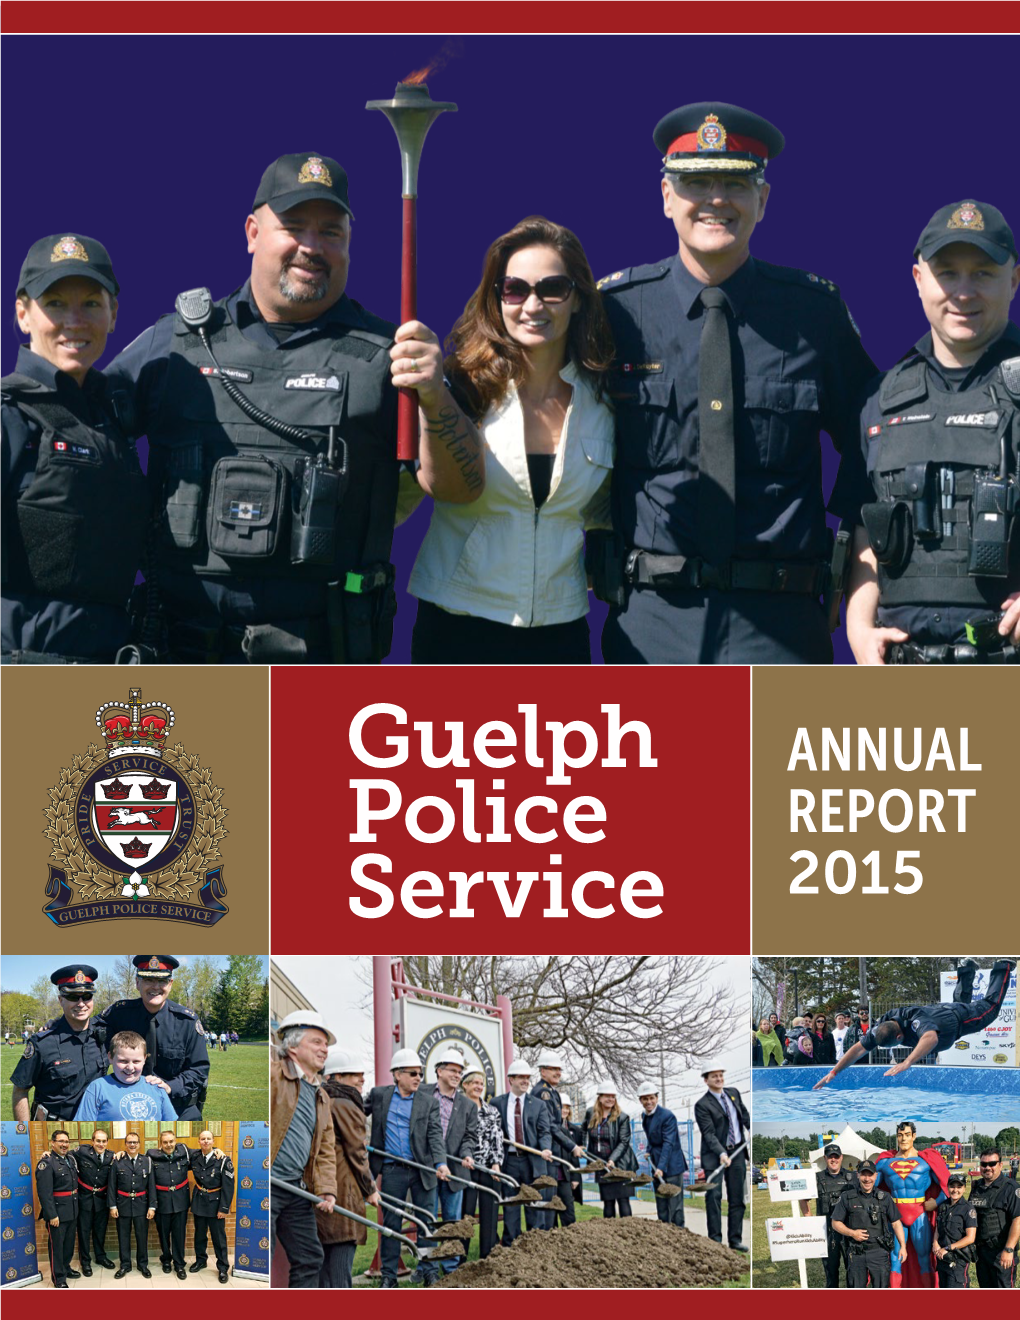 Guelph Police Service 2015 Annual Report